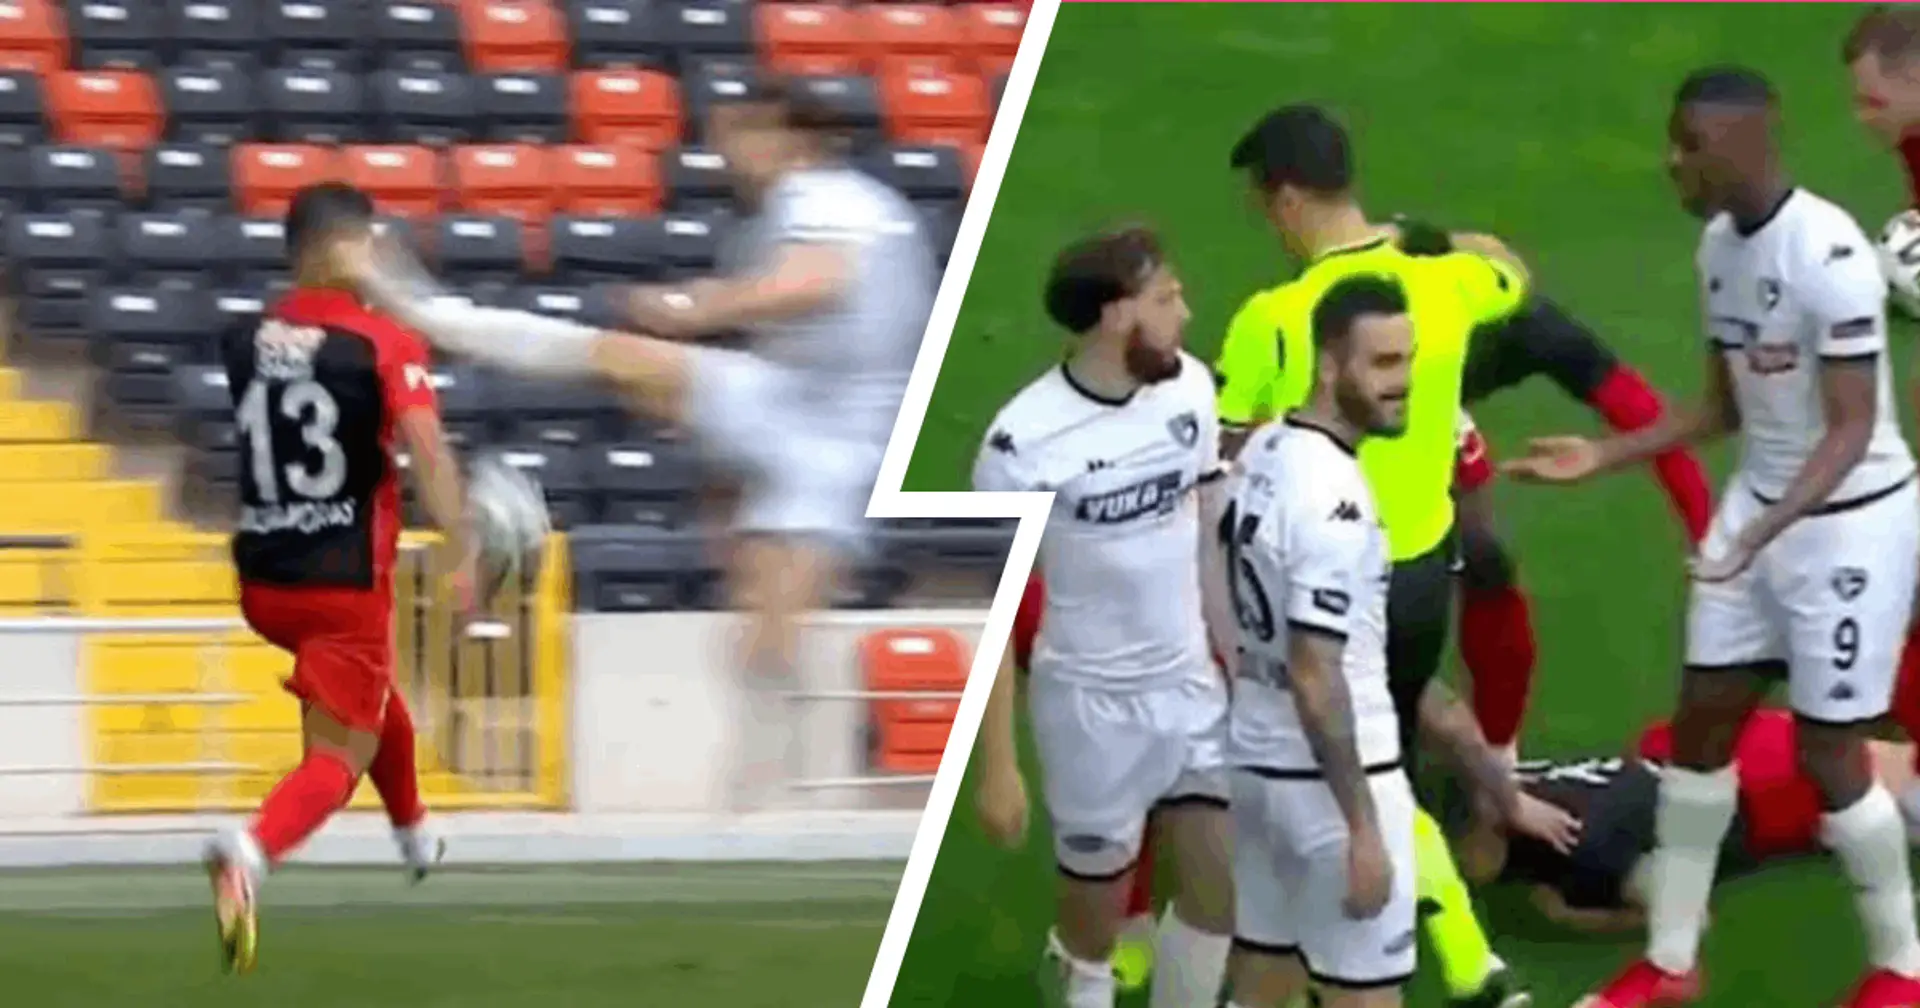 Turkish star attacks opponent with a horror kung-fu kick in the face, leaves him needing seven stitches